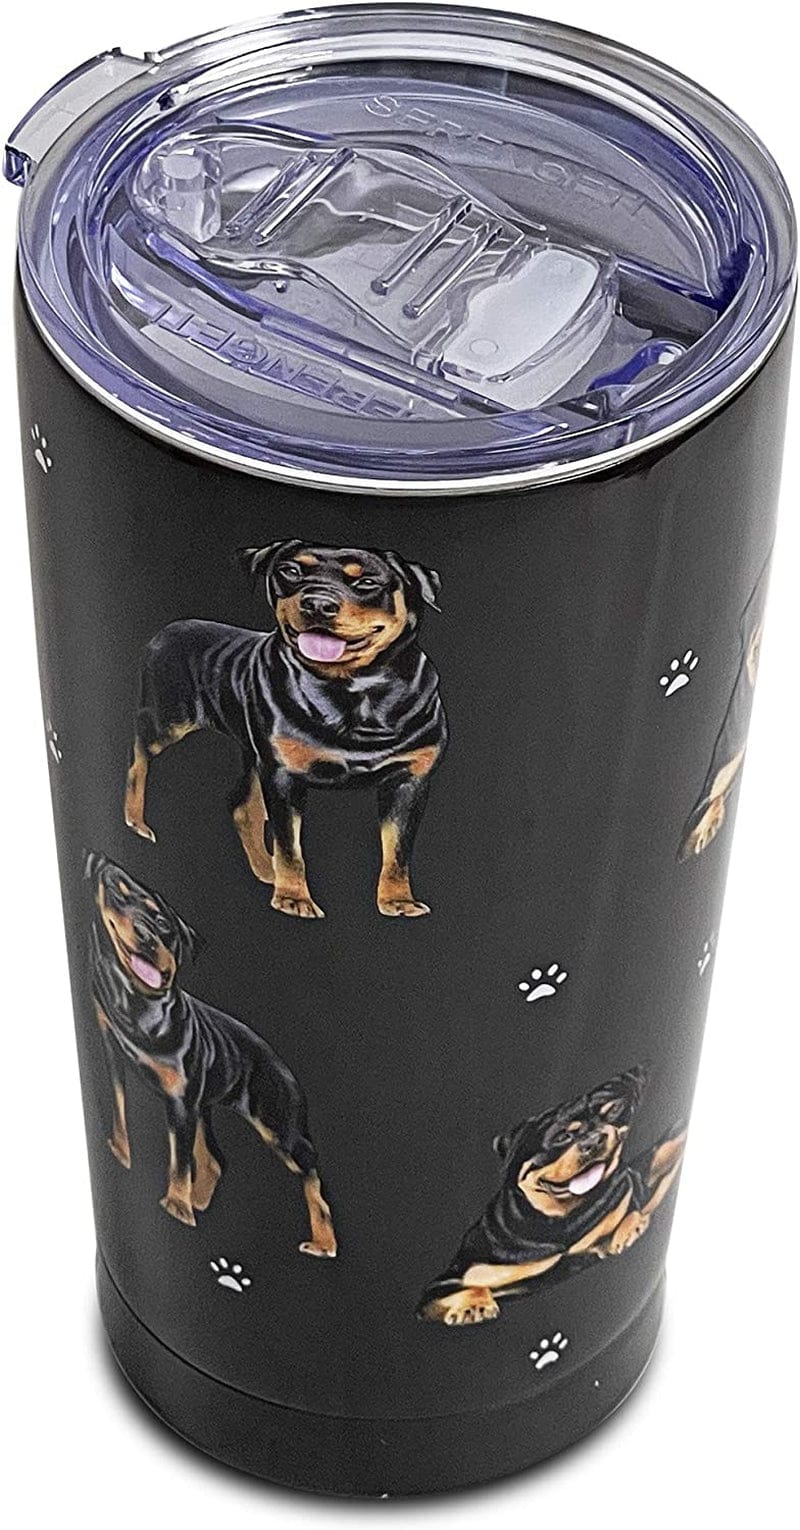 Australian Shepherd SERENGETI 16 Oz. Stainless Steel, Vacuum Insulated Tumbler with Spill Proof Lid - 3D Print - Insulated Travel Mug for Hot or Cold Drinks (Australian Shepherd Tumbler)